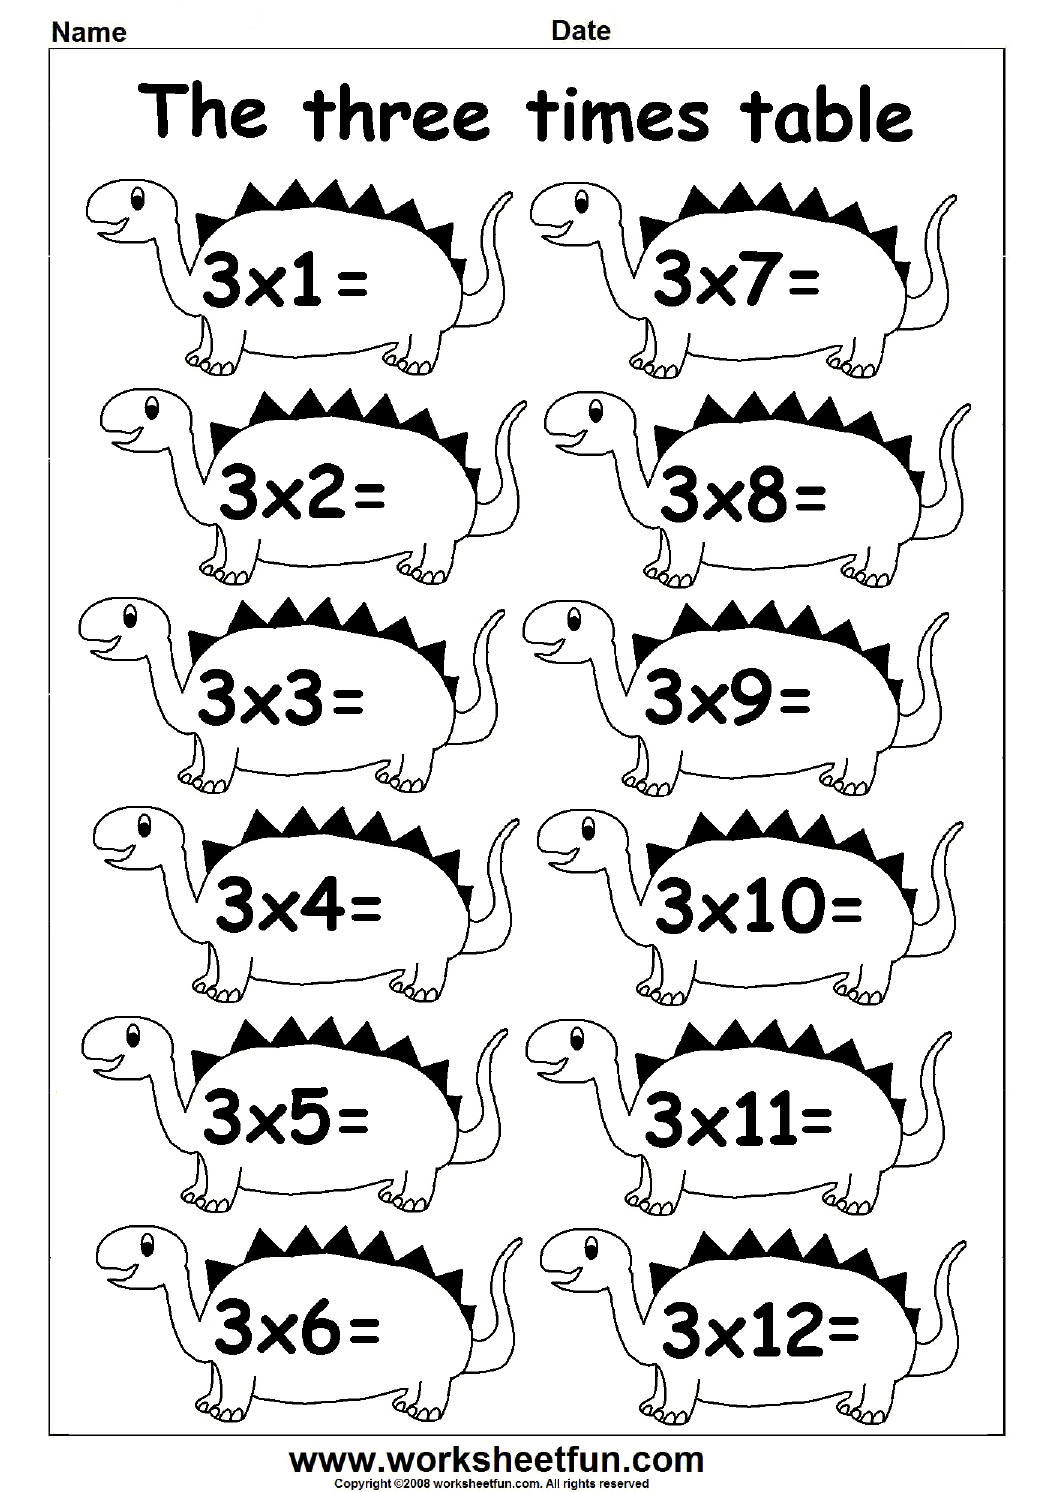 multiplication-worksheets-3-and-4-times-tables-printable